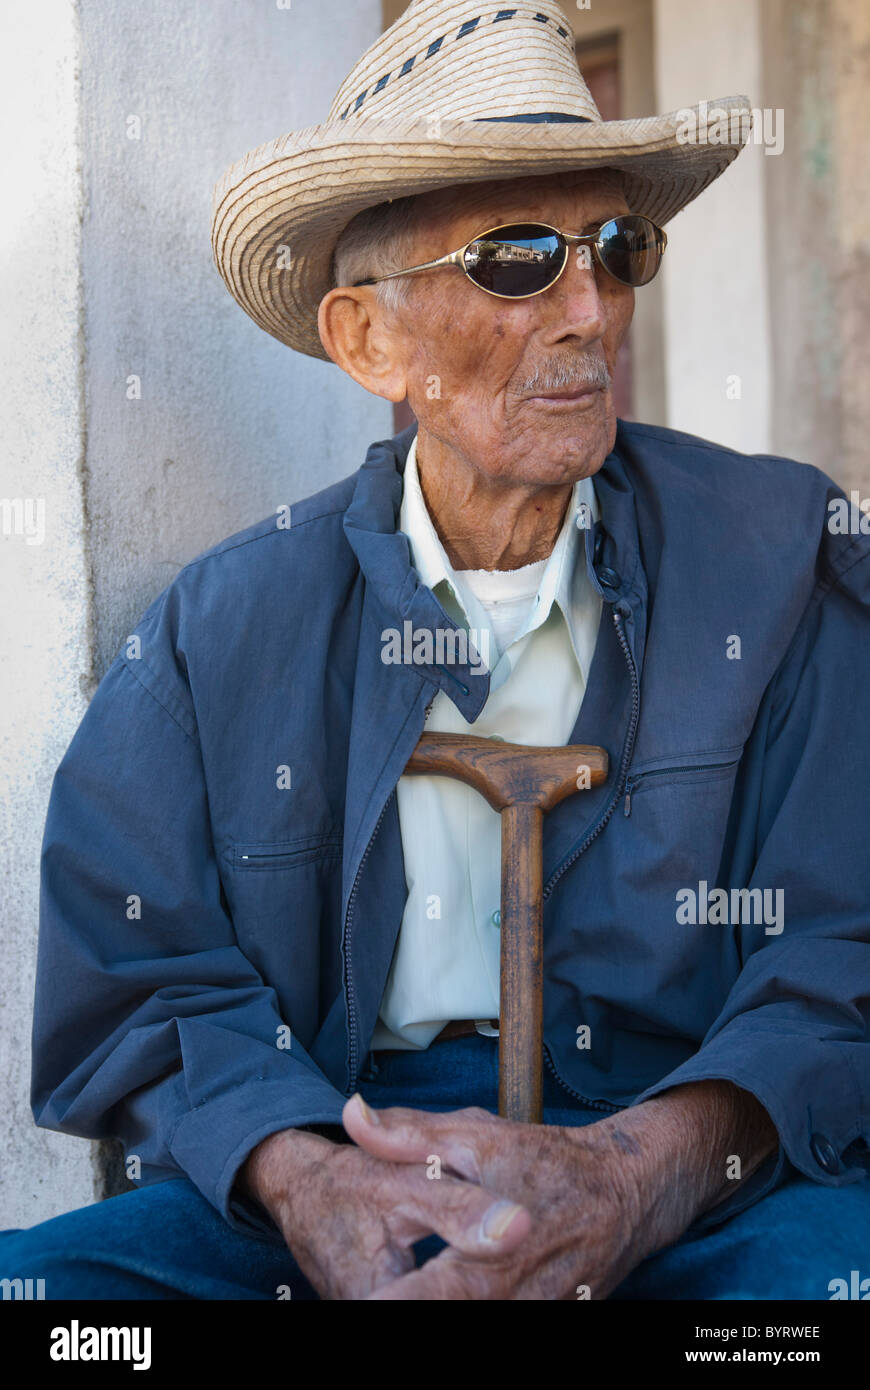 Old Cowboy Hat High Resolution Stock Photography and Images - Alamy